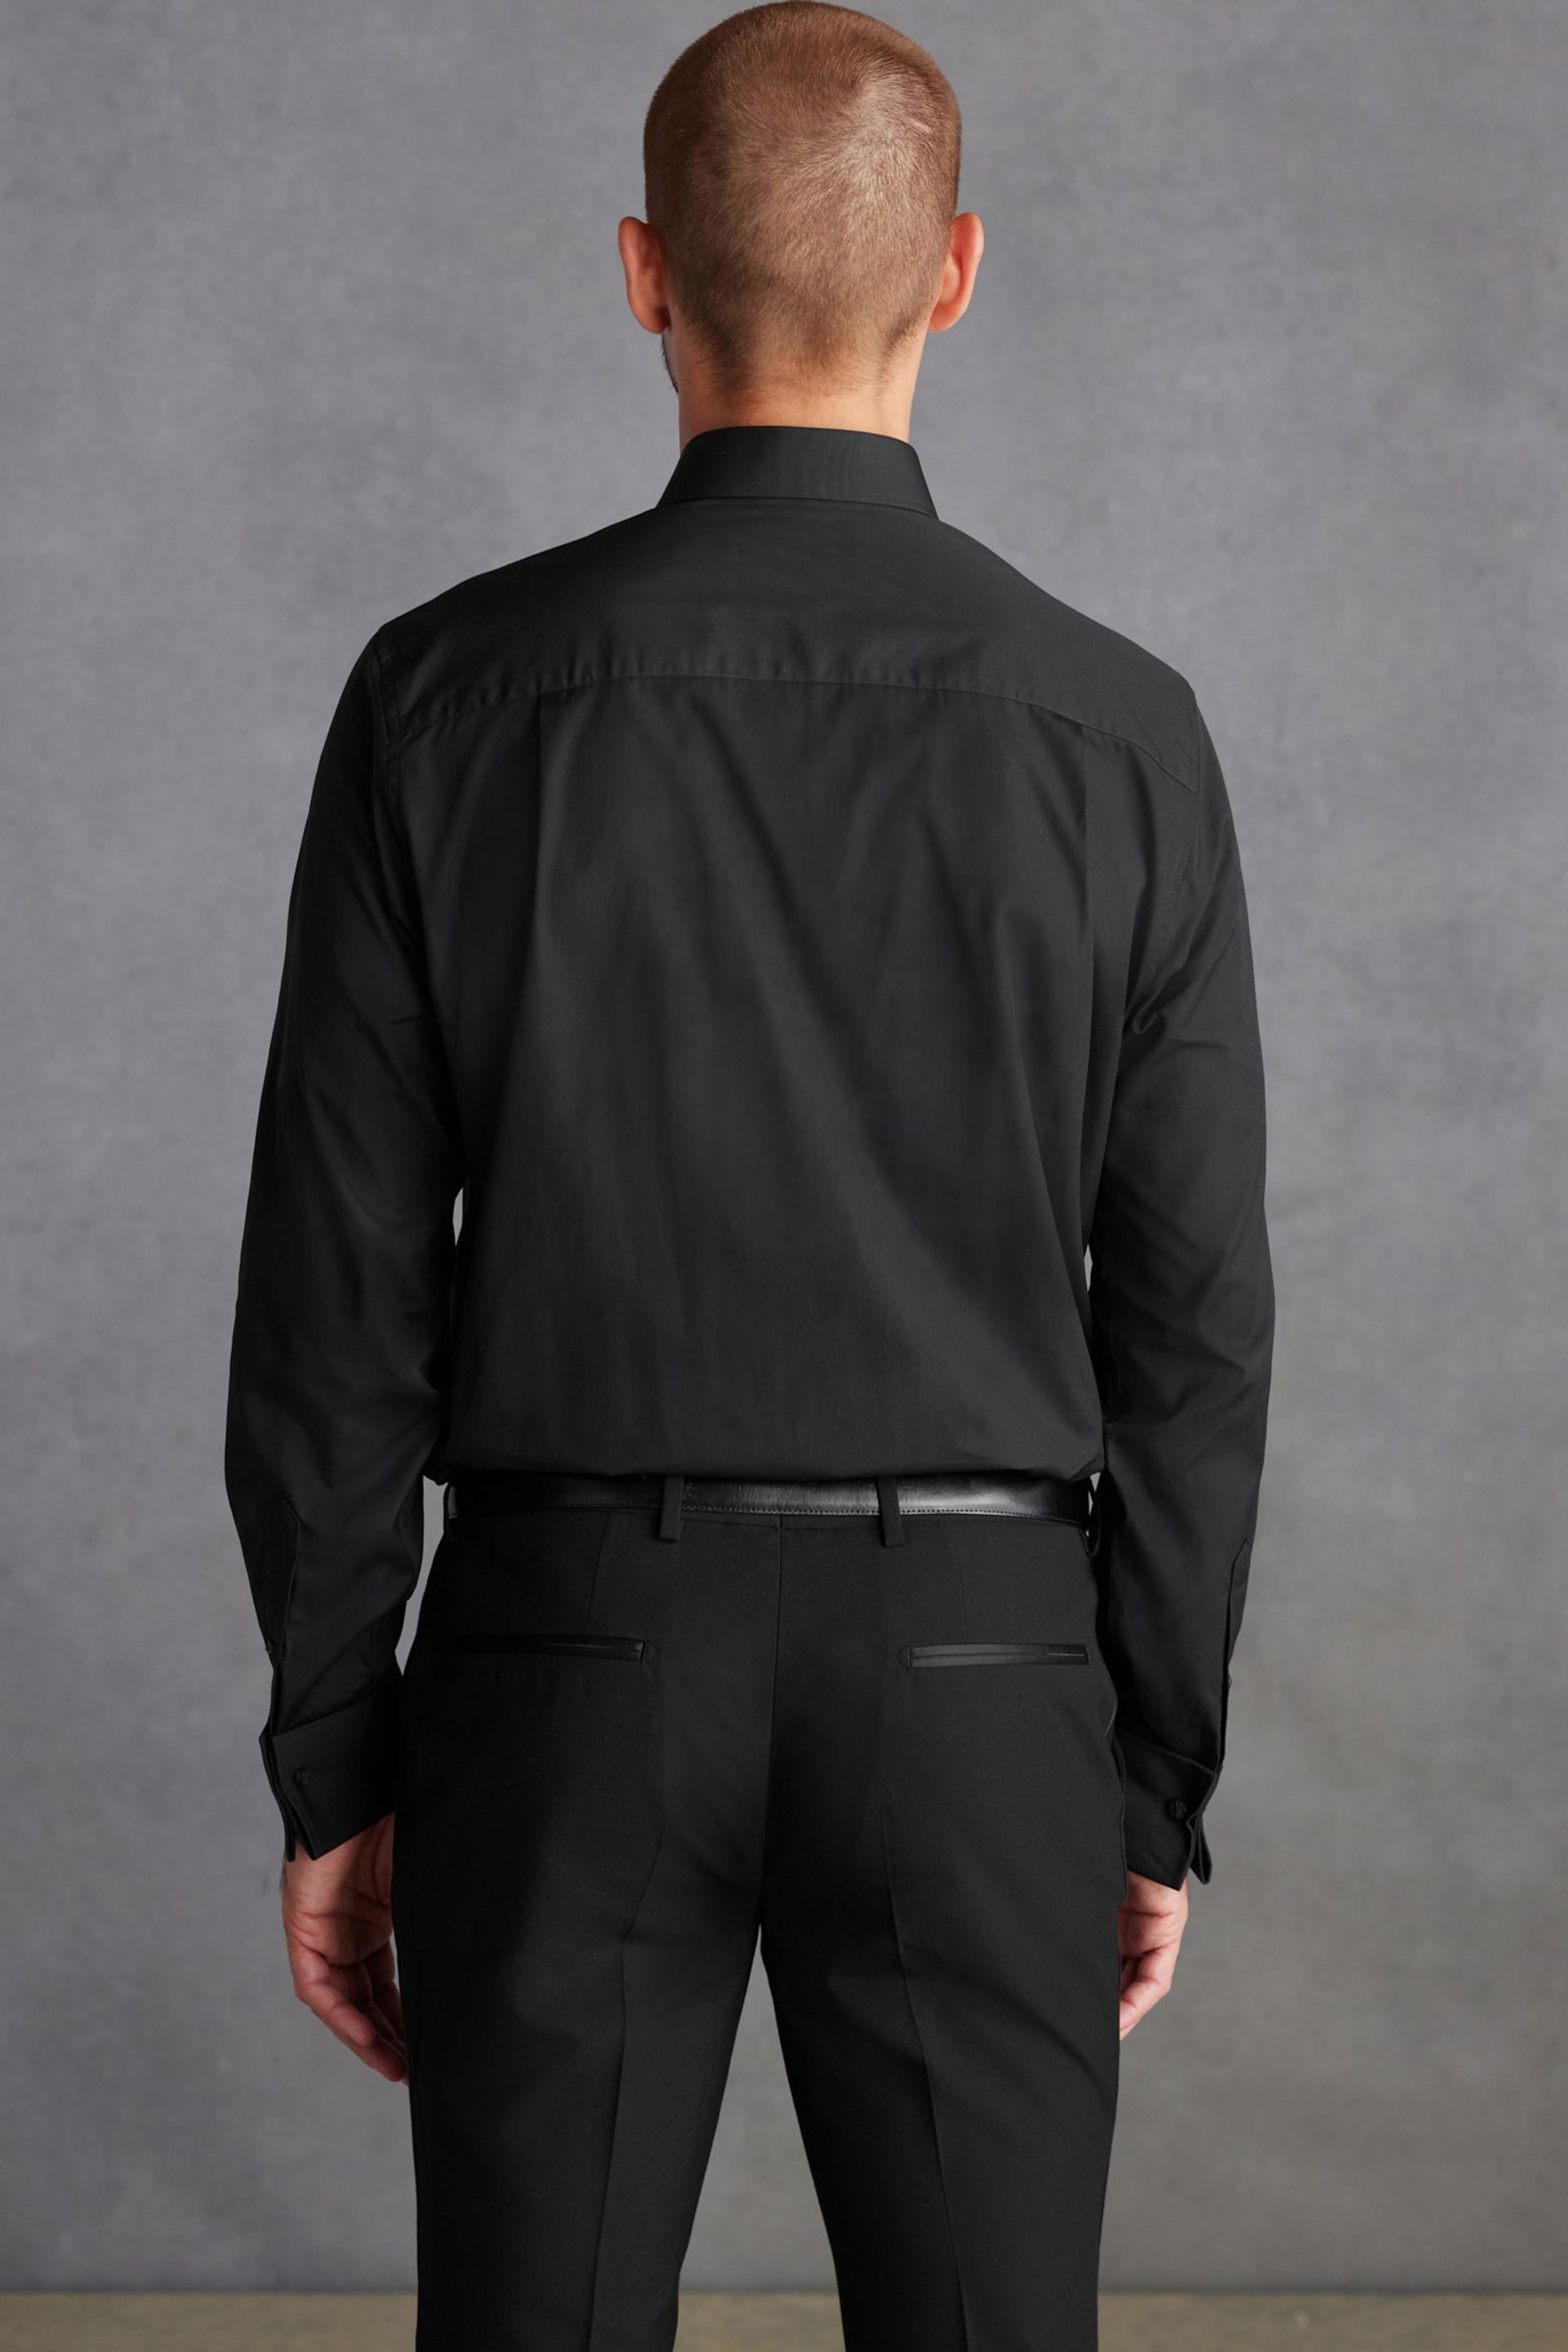 Black Regular Fit Pleated Double Cuff Dress Shirt - Image 3 of 7